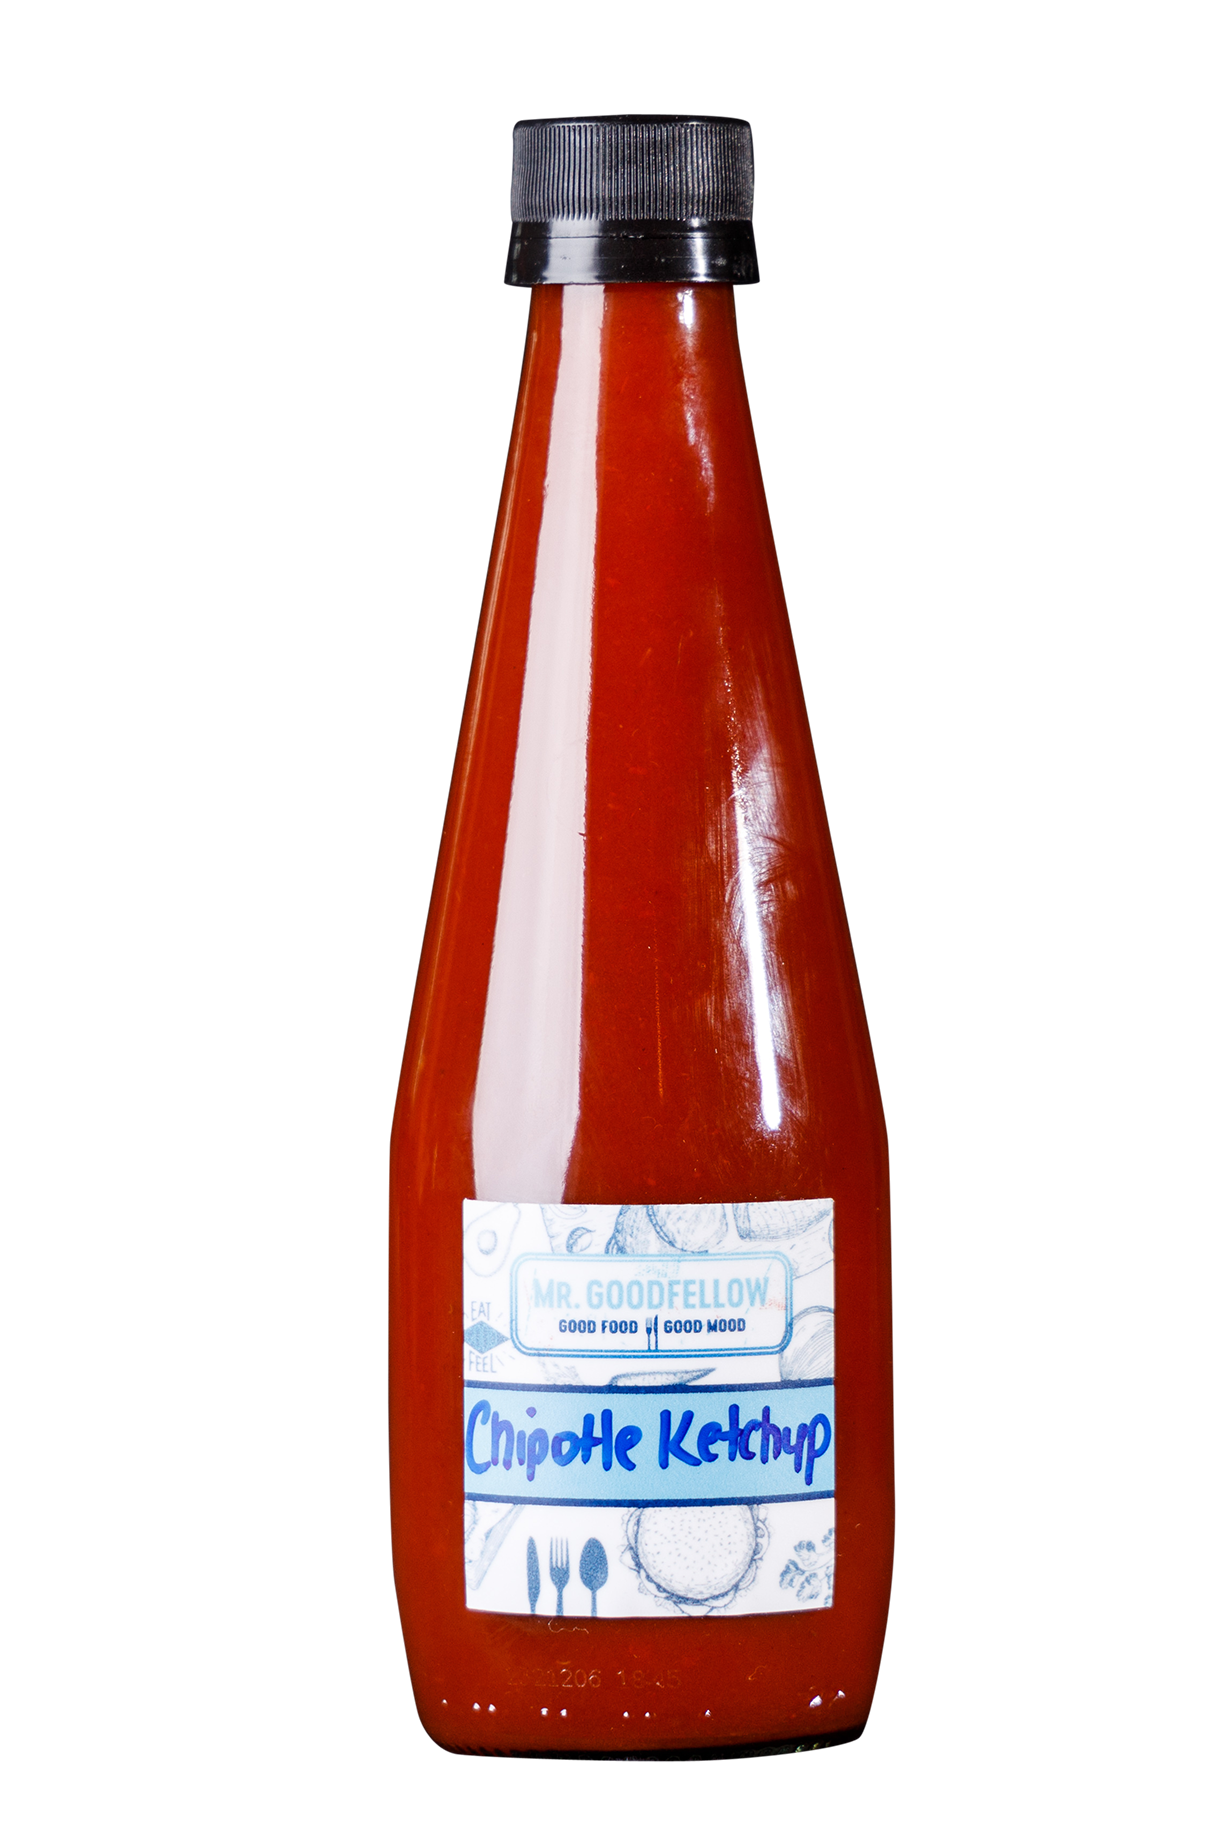 Chipotle Ketchup - Mr Goodfellow